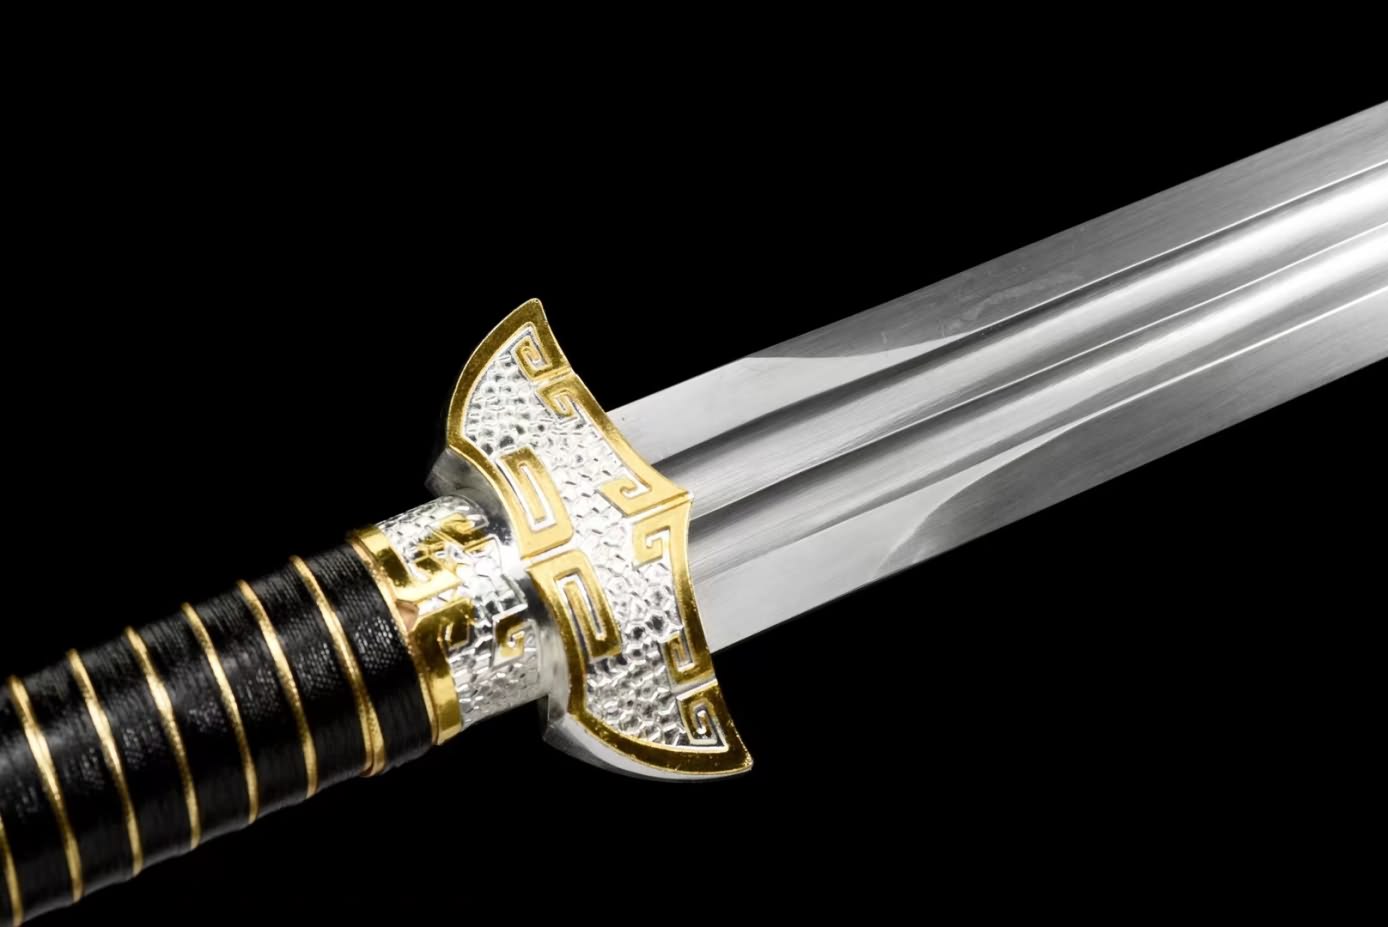 Chinese sword,Black Gold jian Forged high Carbon Steel Blade,Alloy Fittings,PU Scabbard,LOONGSWORD